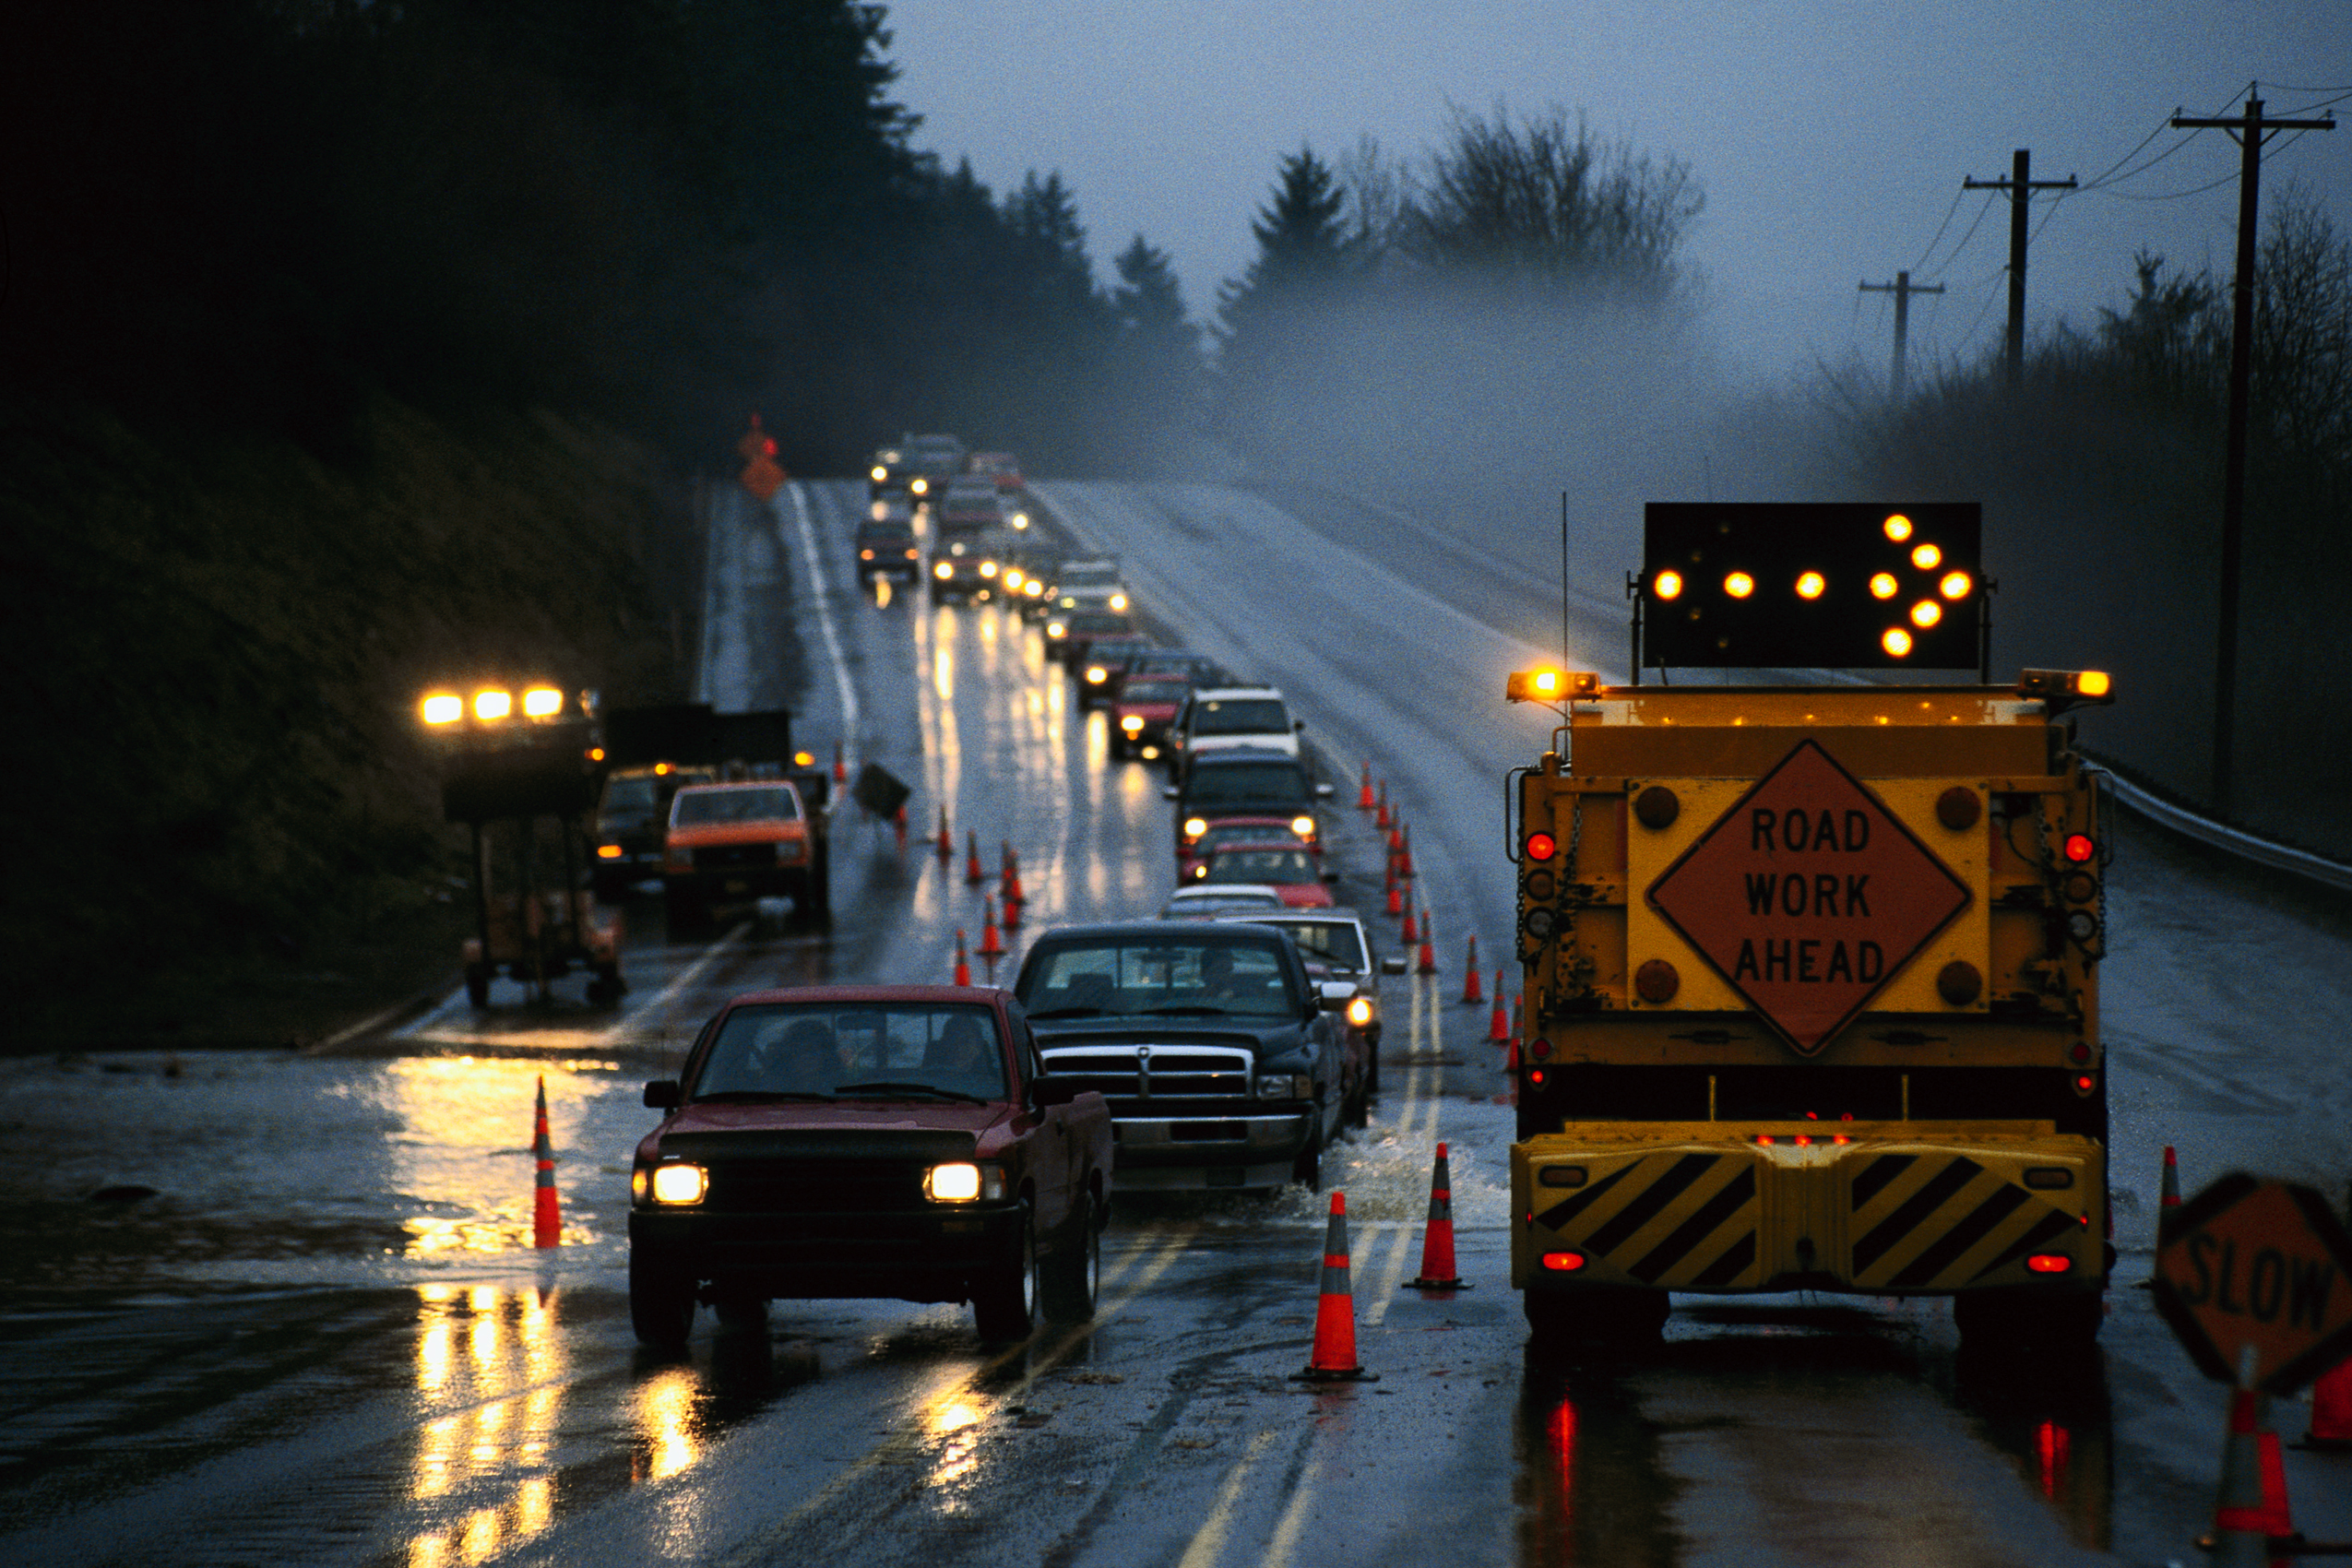 photo of cars on a roadway at night approaching a movable road work ahead sign